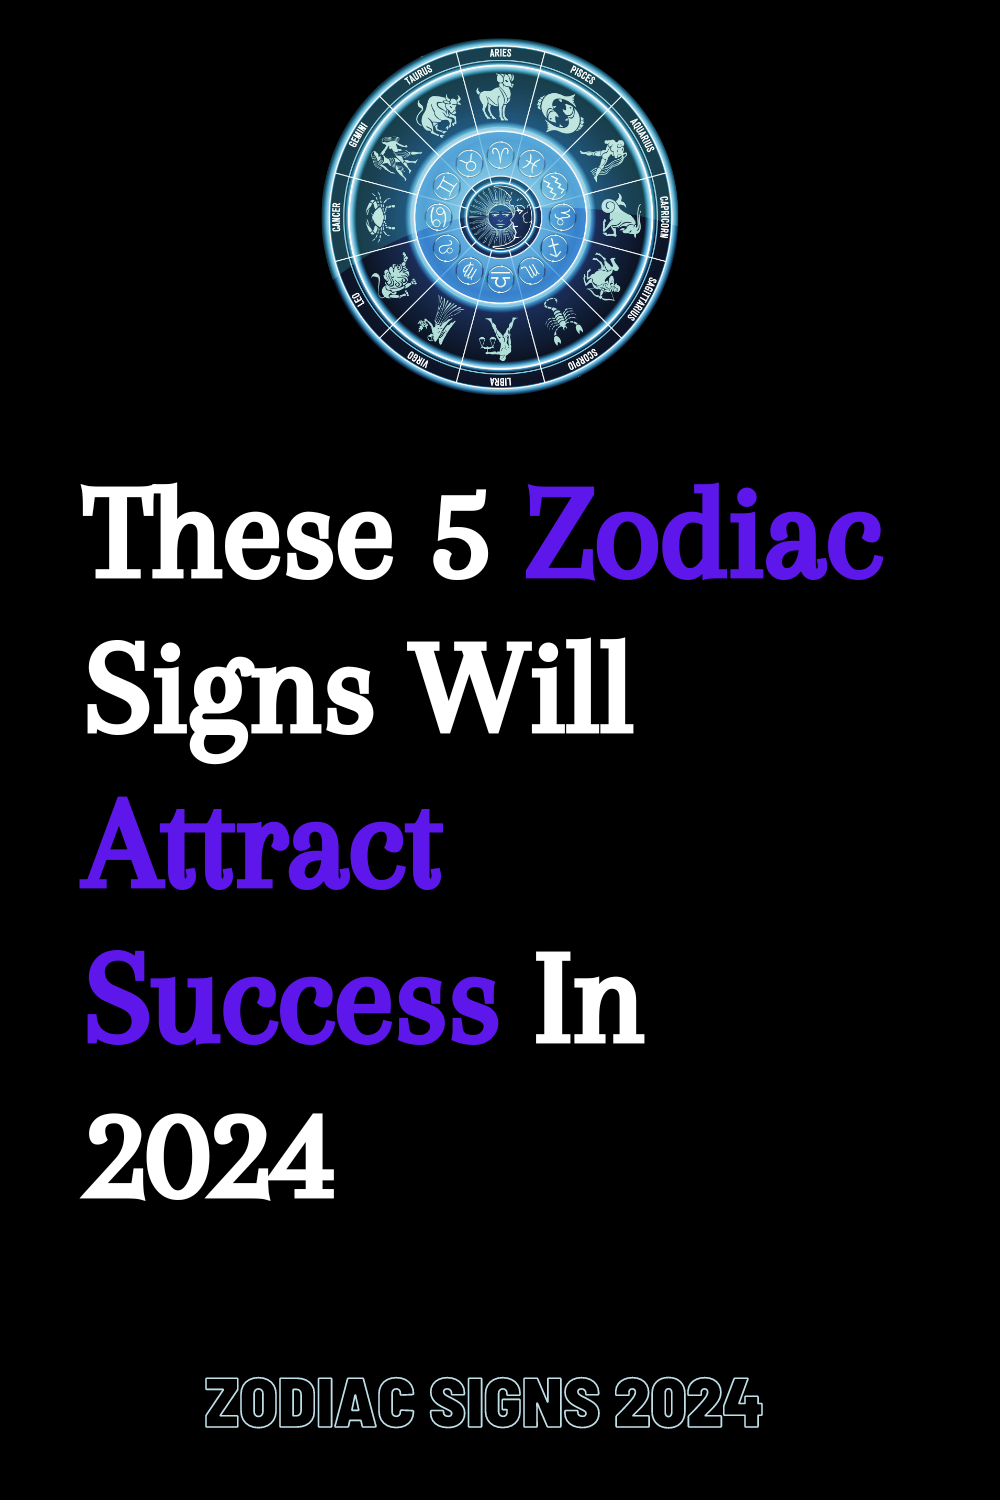 These 5 Zodiac Signs Will Attract Success In 2024